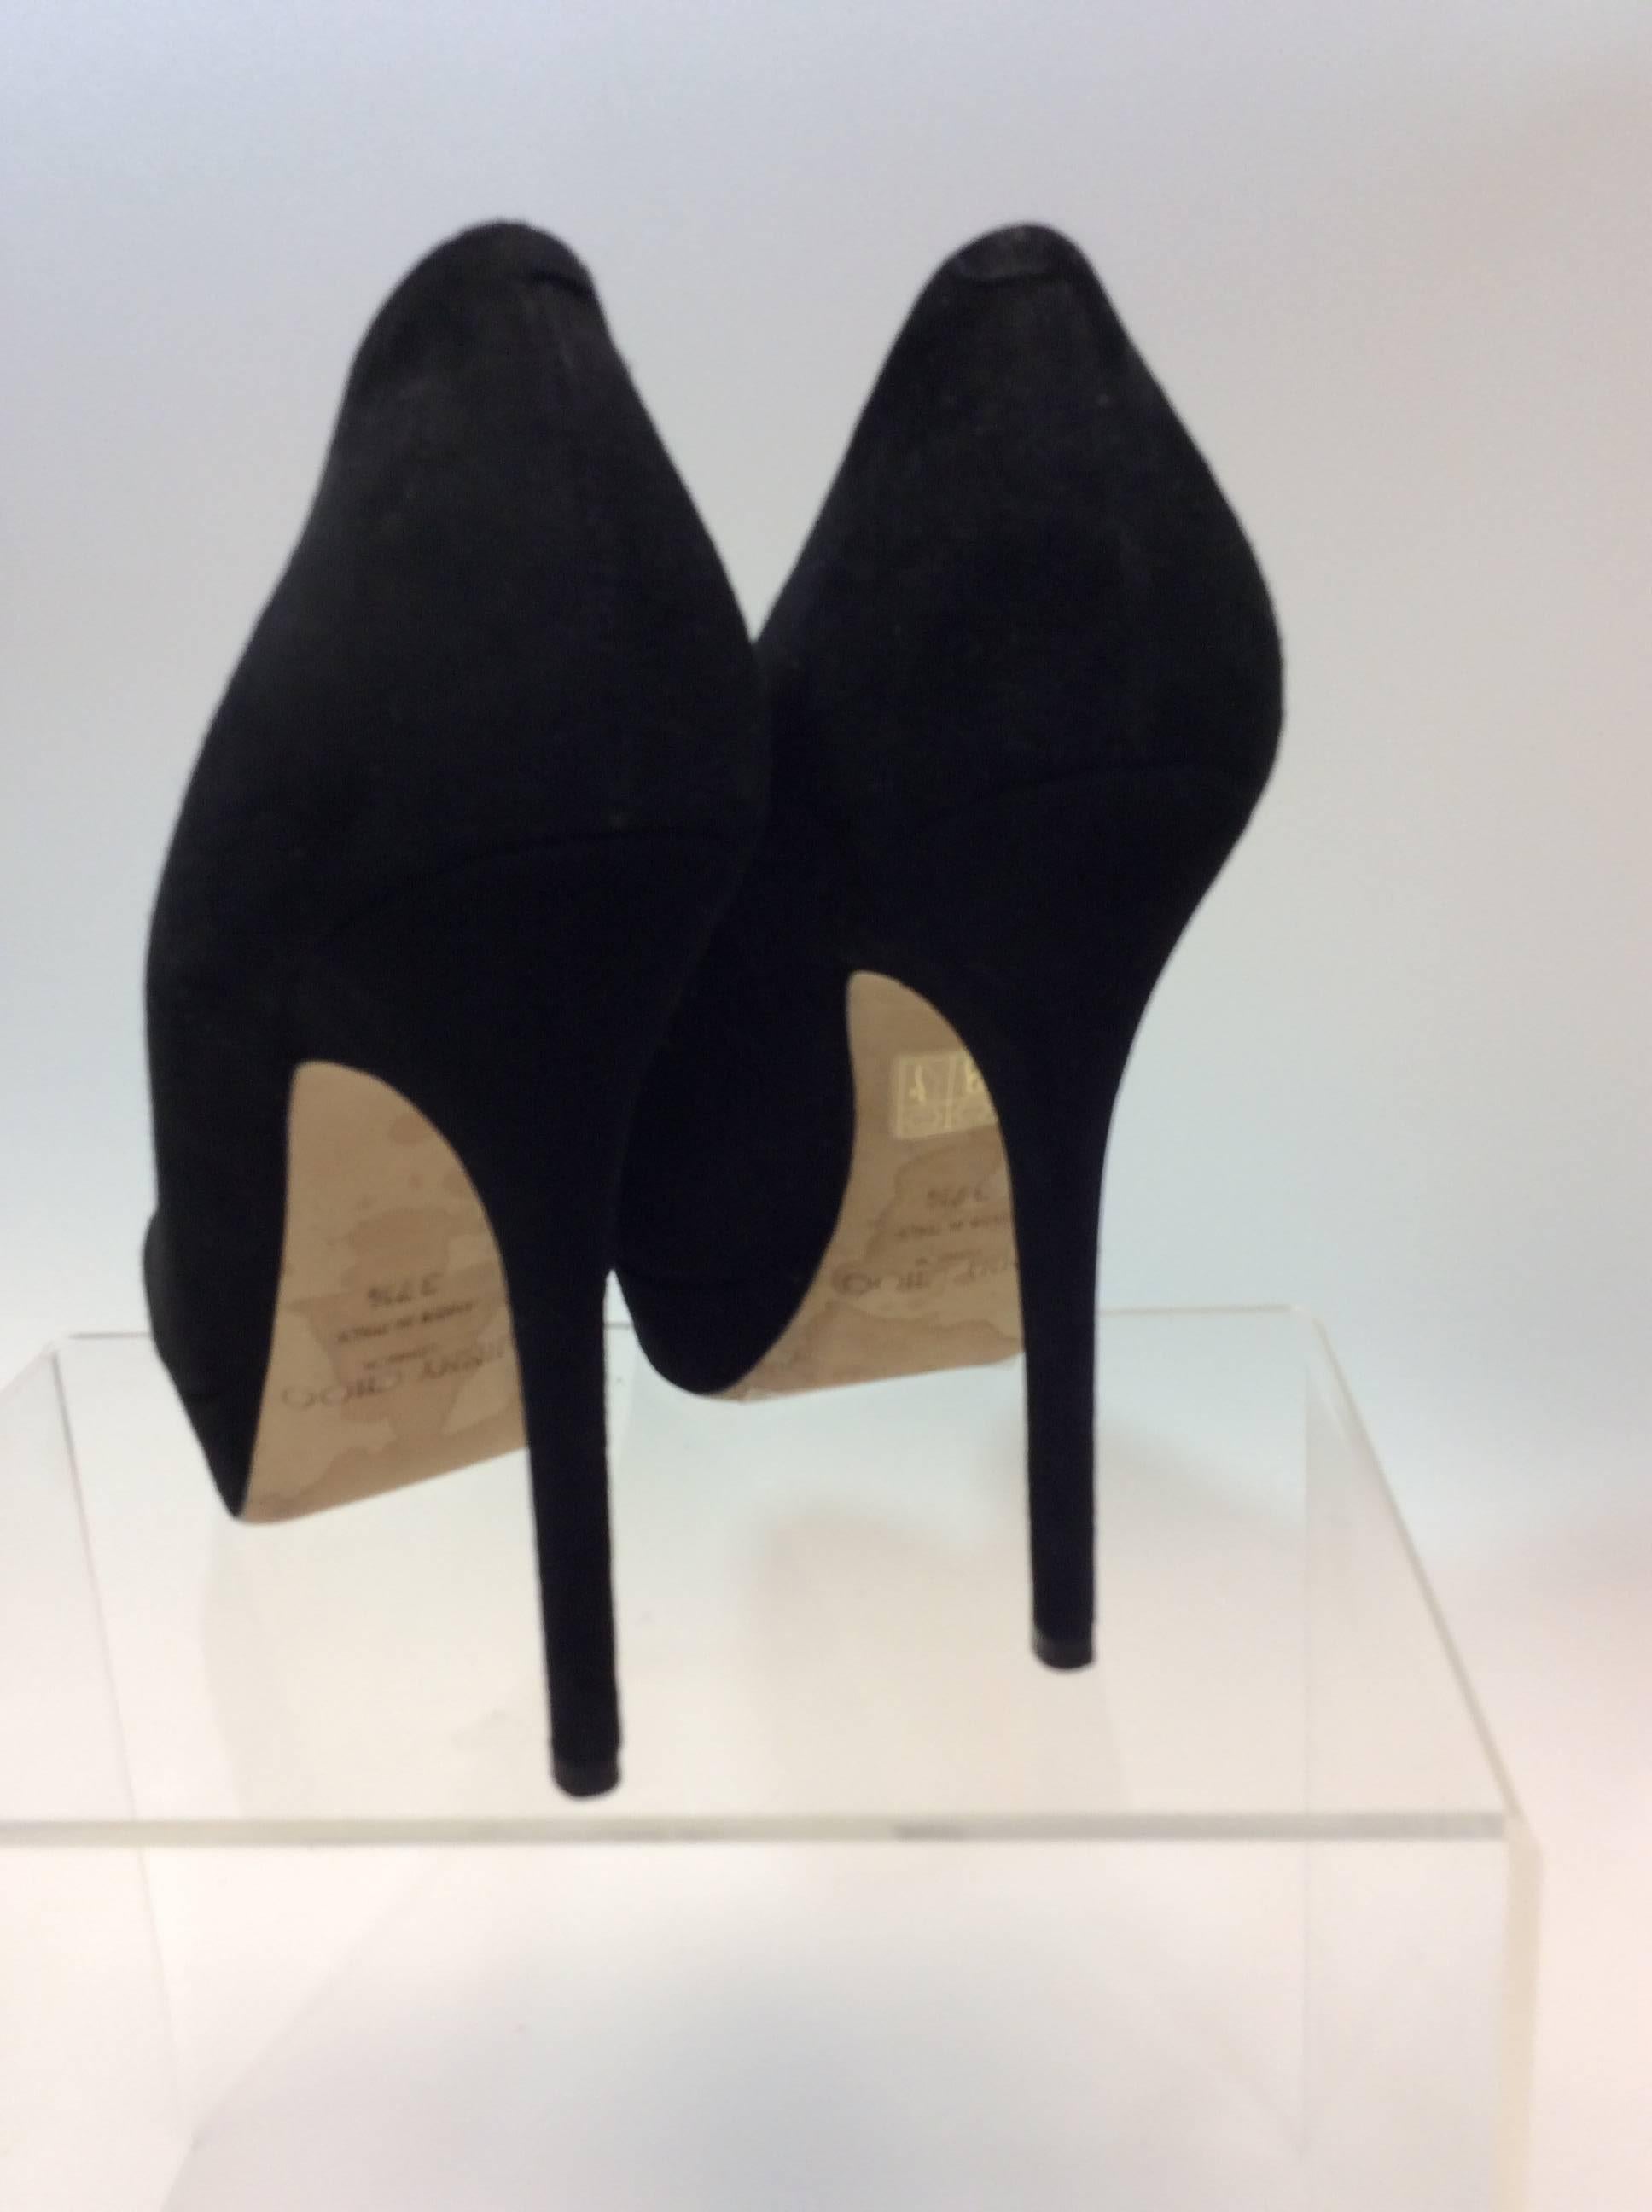 Jimmy Choo Black Heels In Excellent Condition For Sale In Narberth, PA